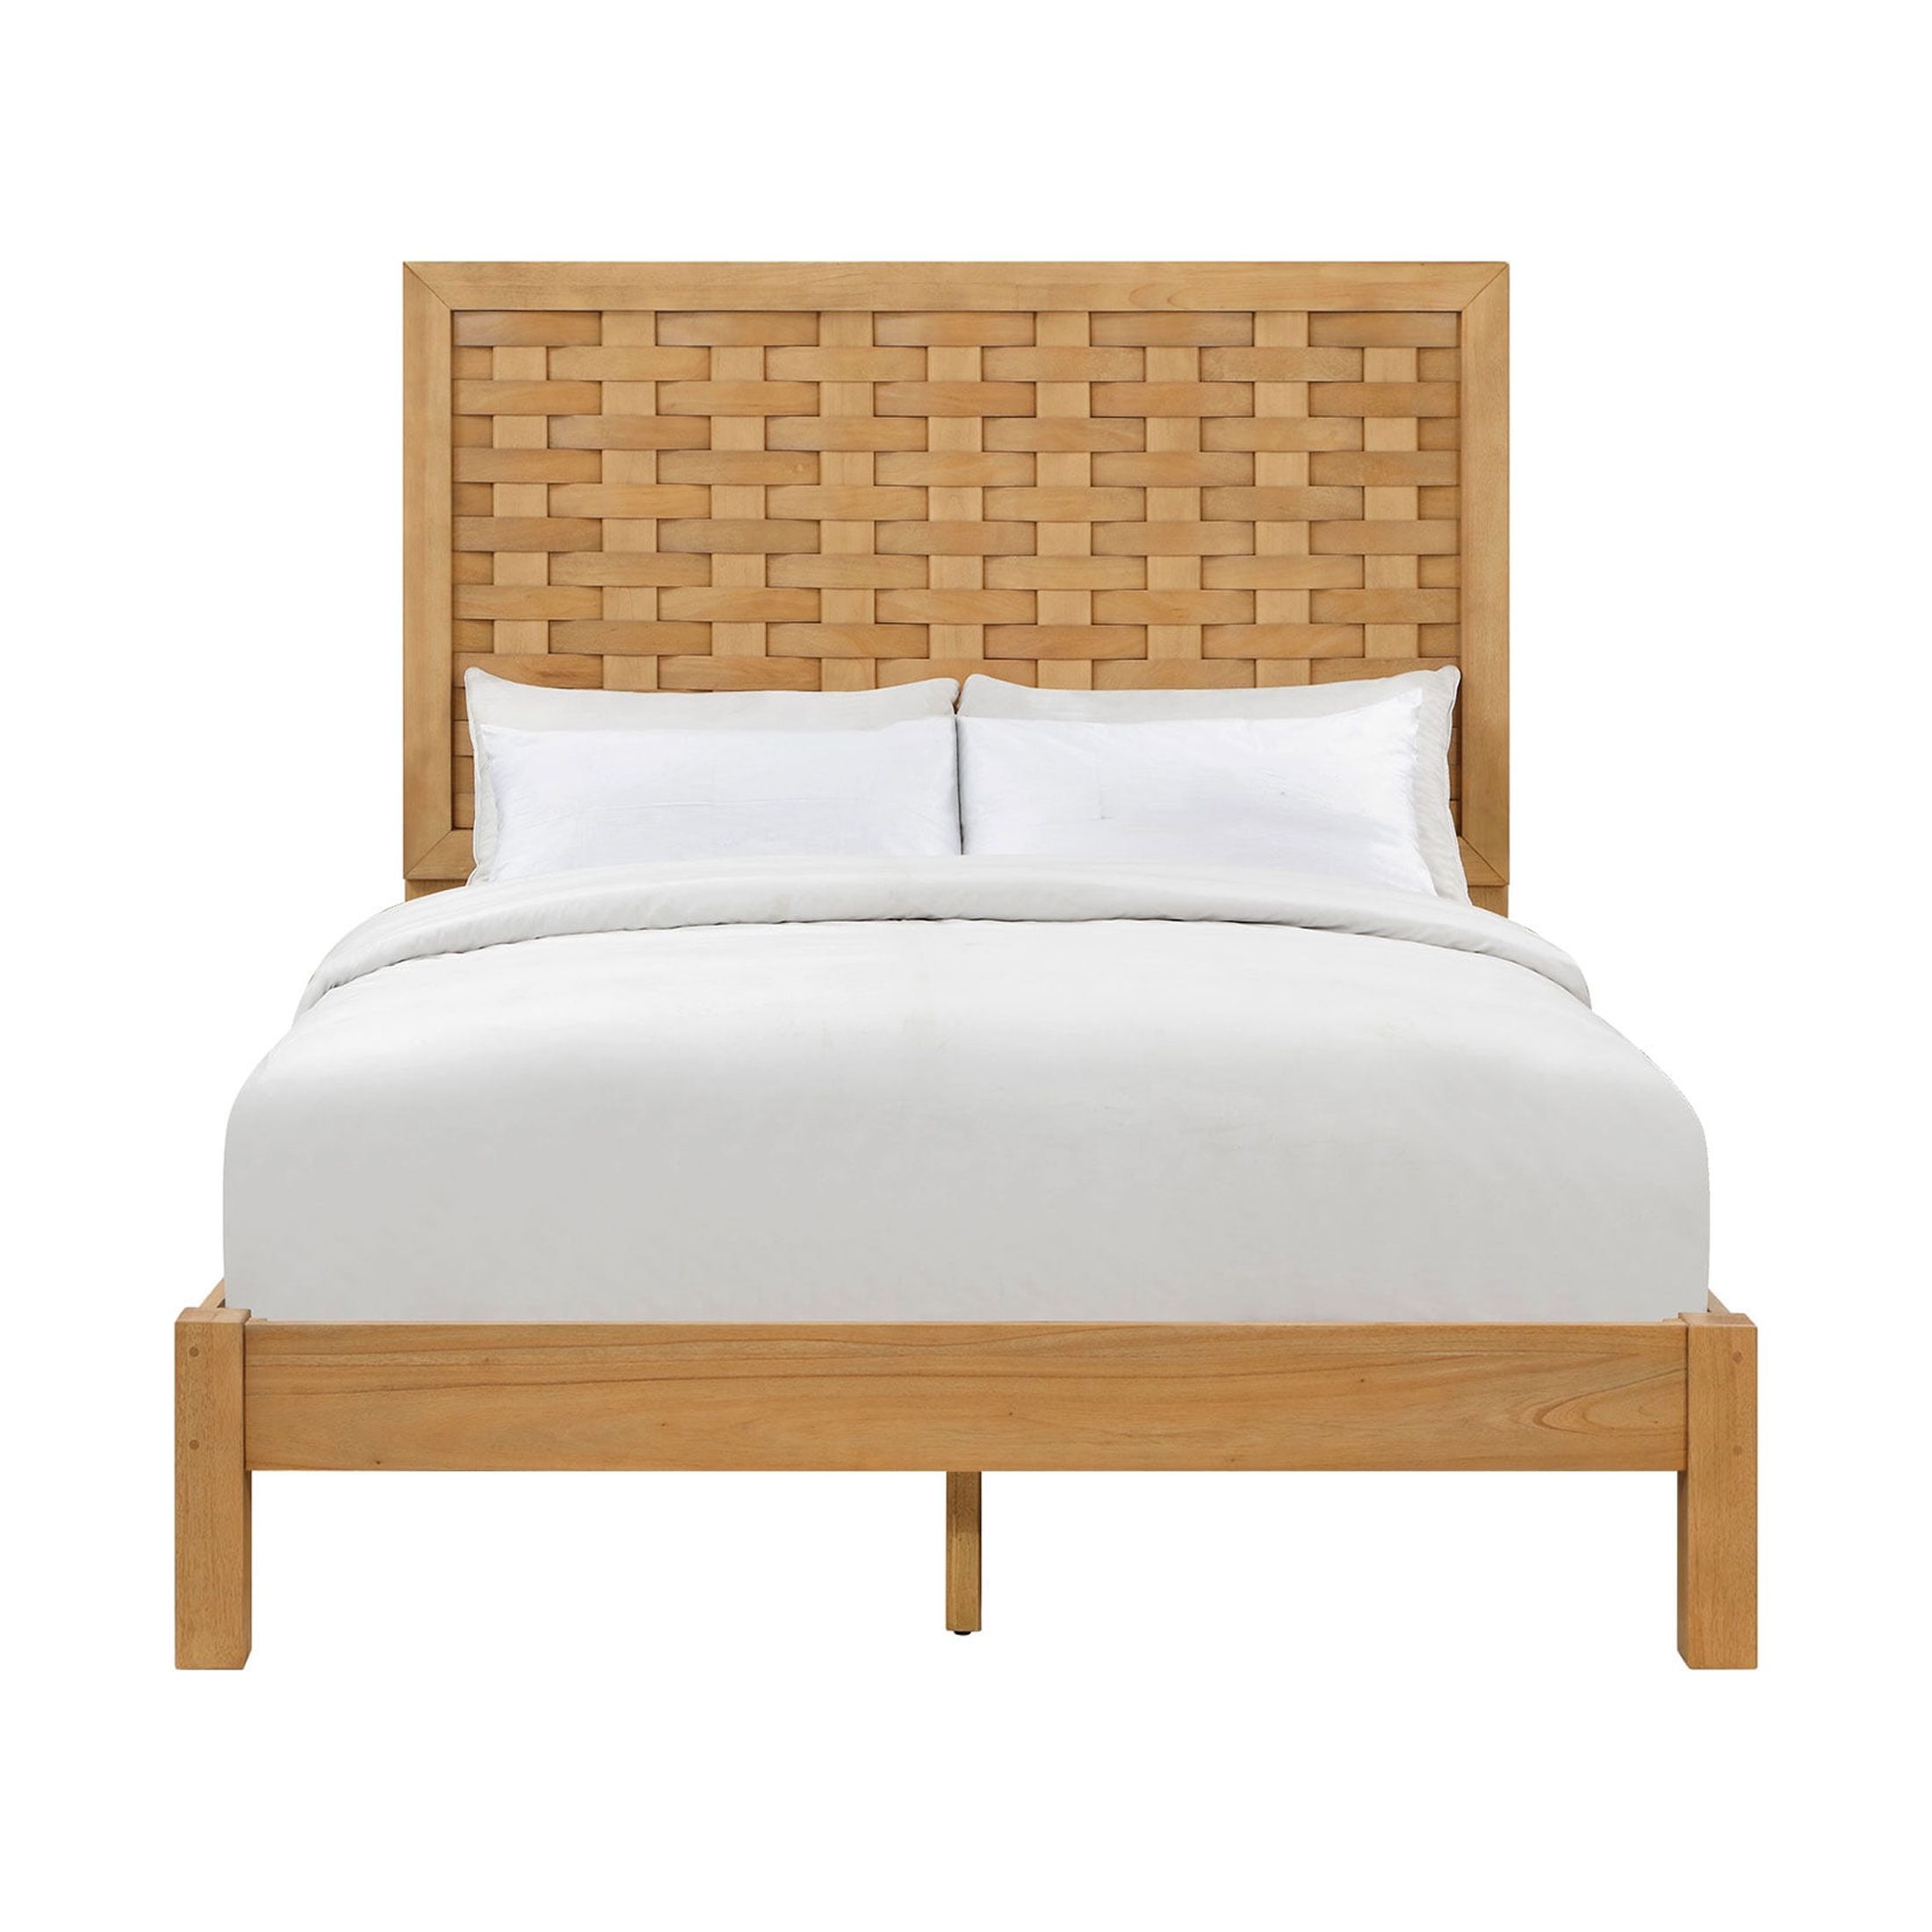 Better Homes & Gardens Bristol Queen Woven Bed, Natural Oak finish, by Dave & Jenny Marrs - Walma... | Walmart (US)